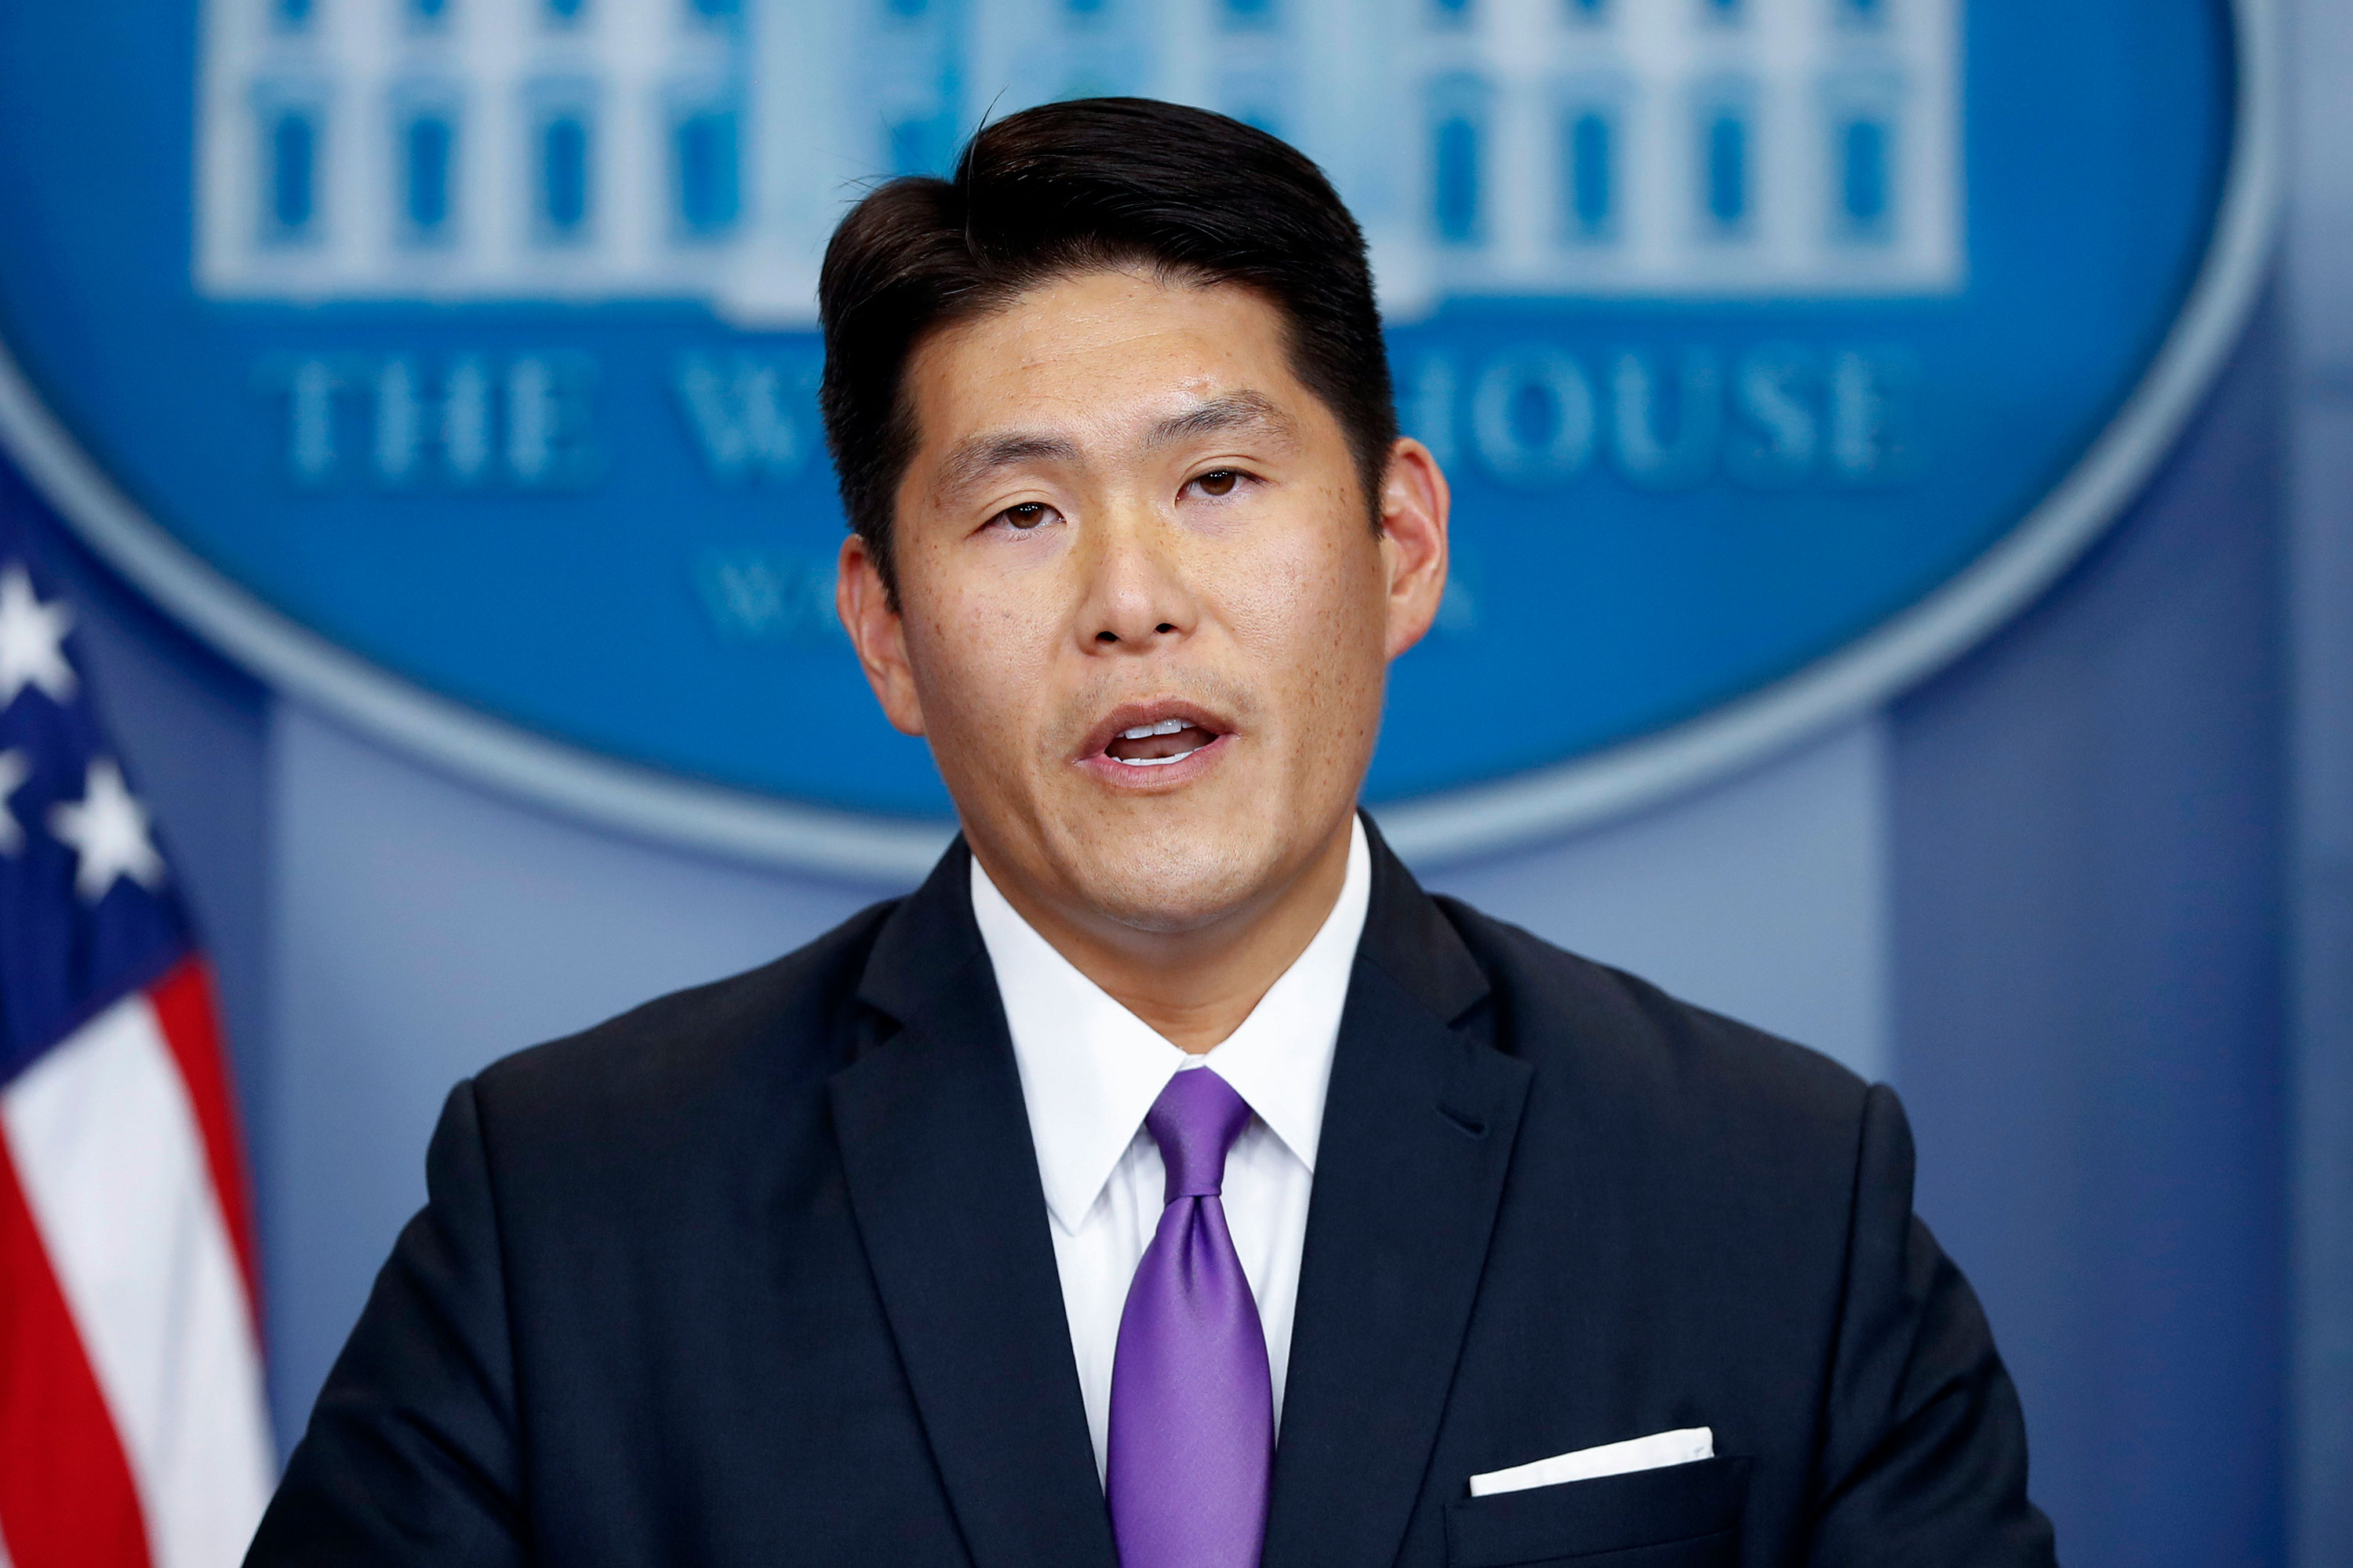 Robert Hur speaks during a press briefing at the White House in 2017.